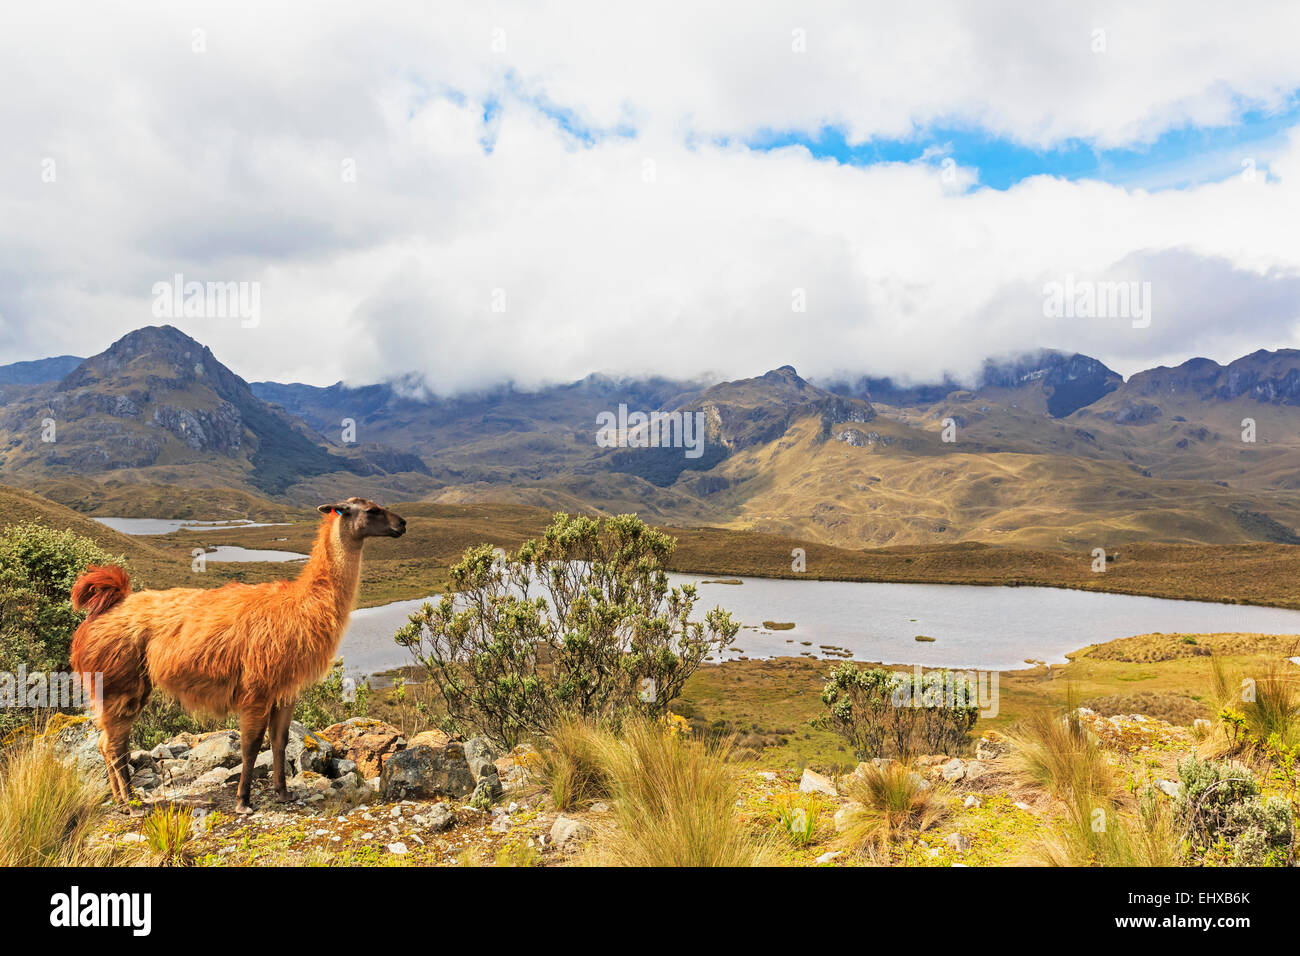 Ecuador, Cajas National Park, llama standing on a hill in front of a lagoon Stock Photo